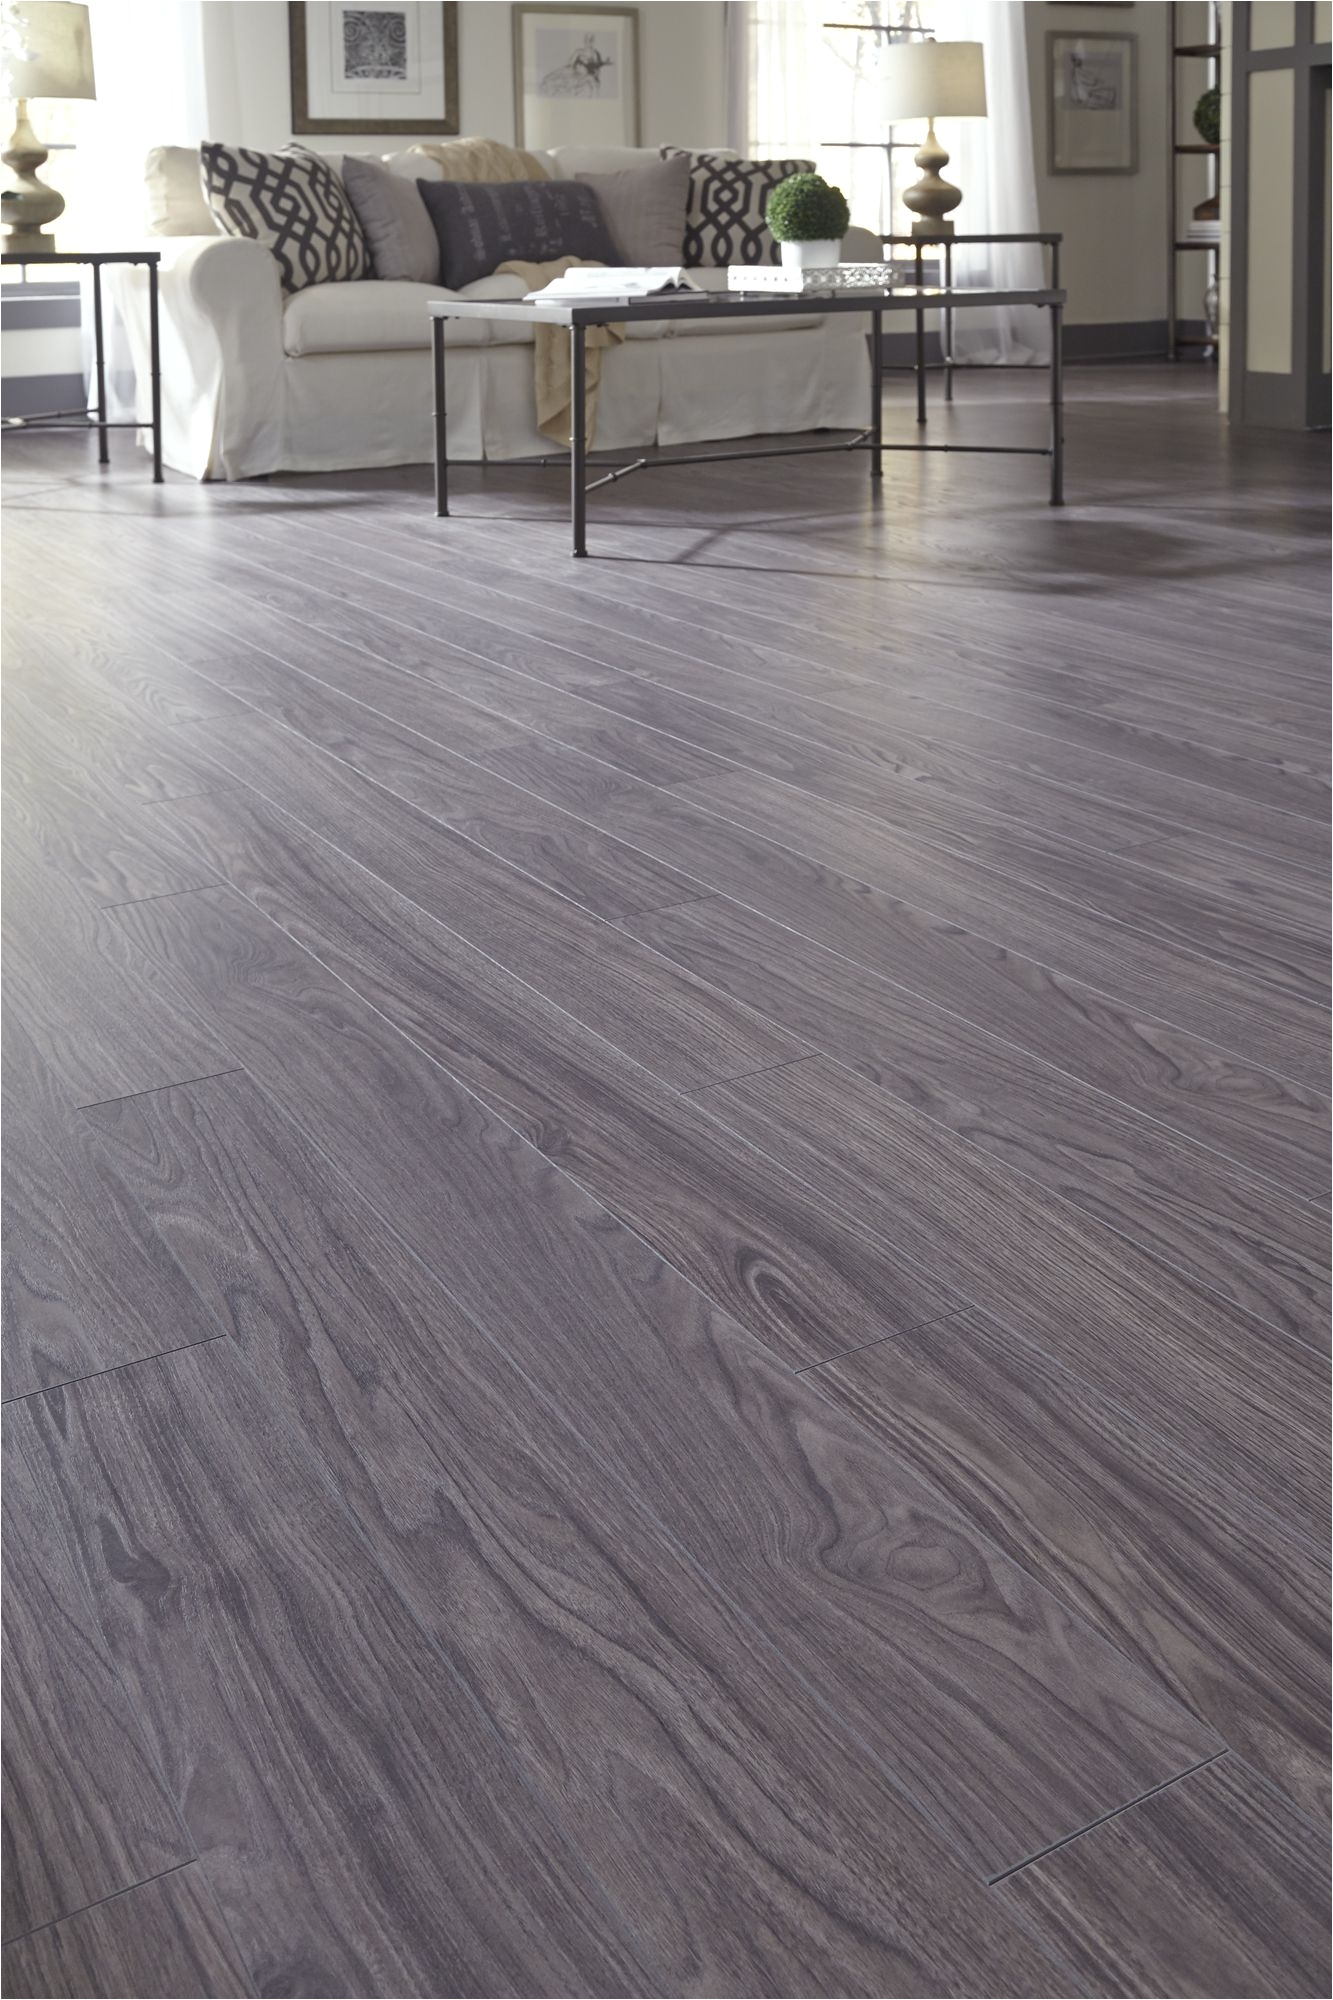 Most Durable Paint for Hardwood Floors Laminate is In Budget and is Durable and Lasts A Very Long Time We